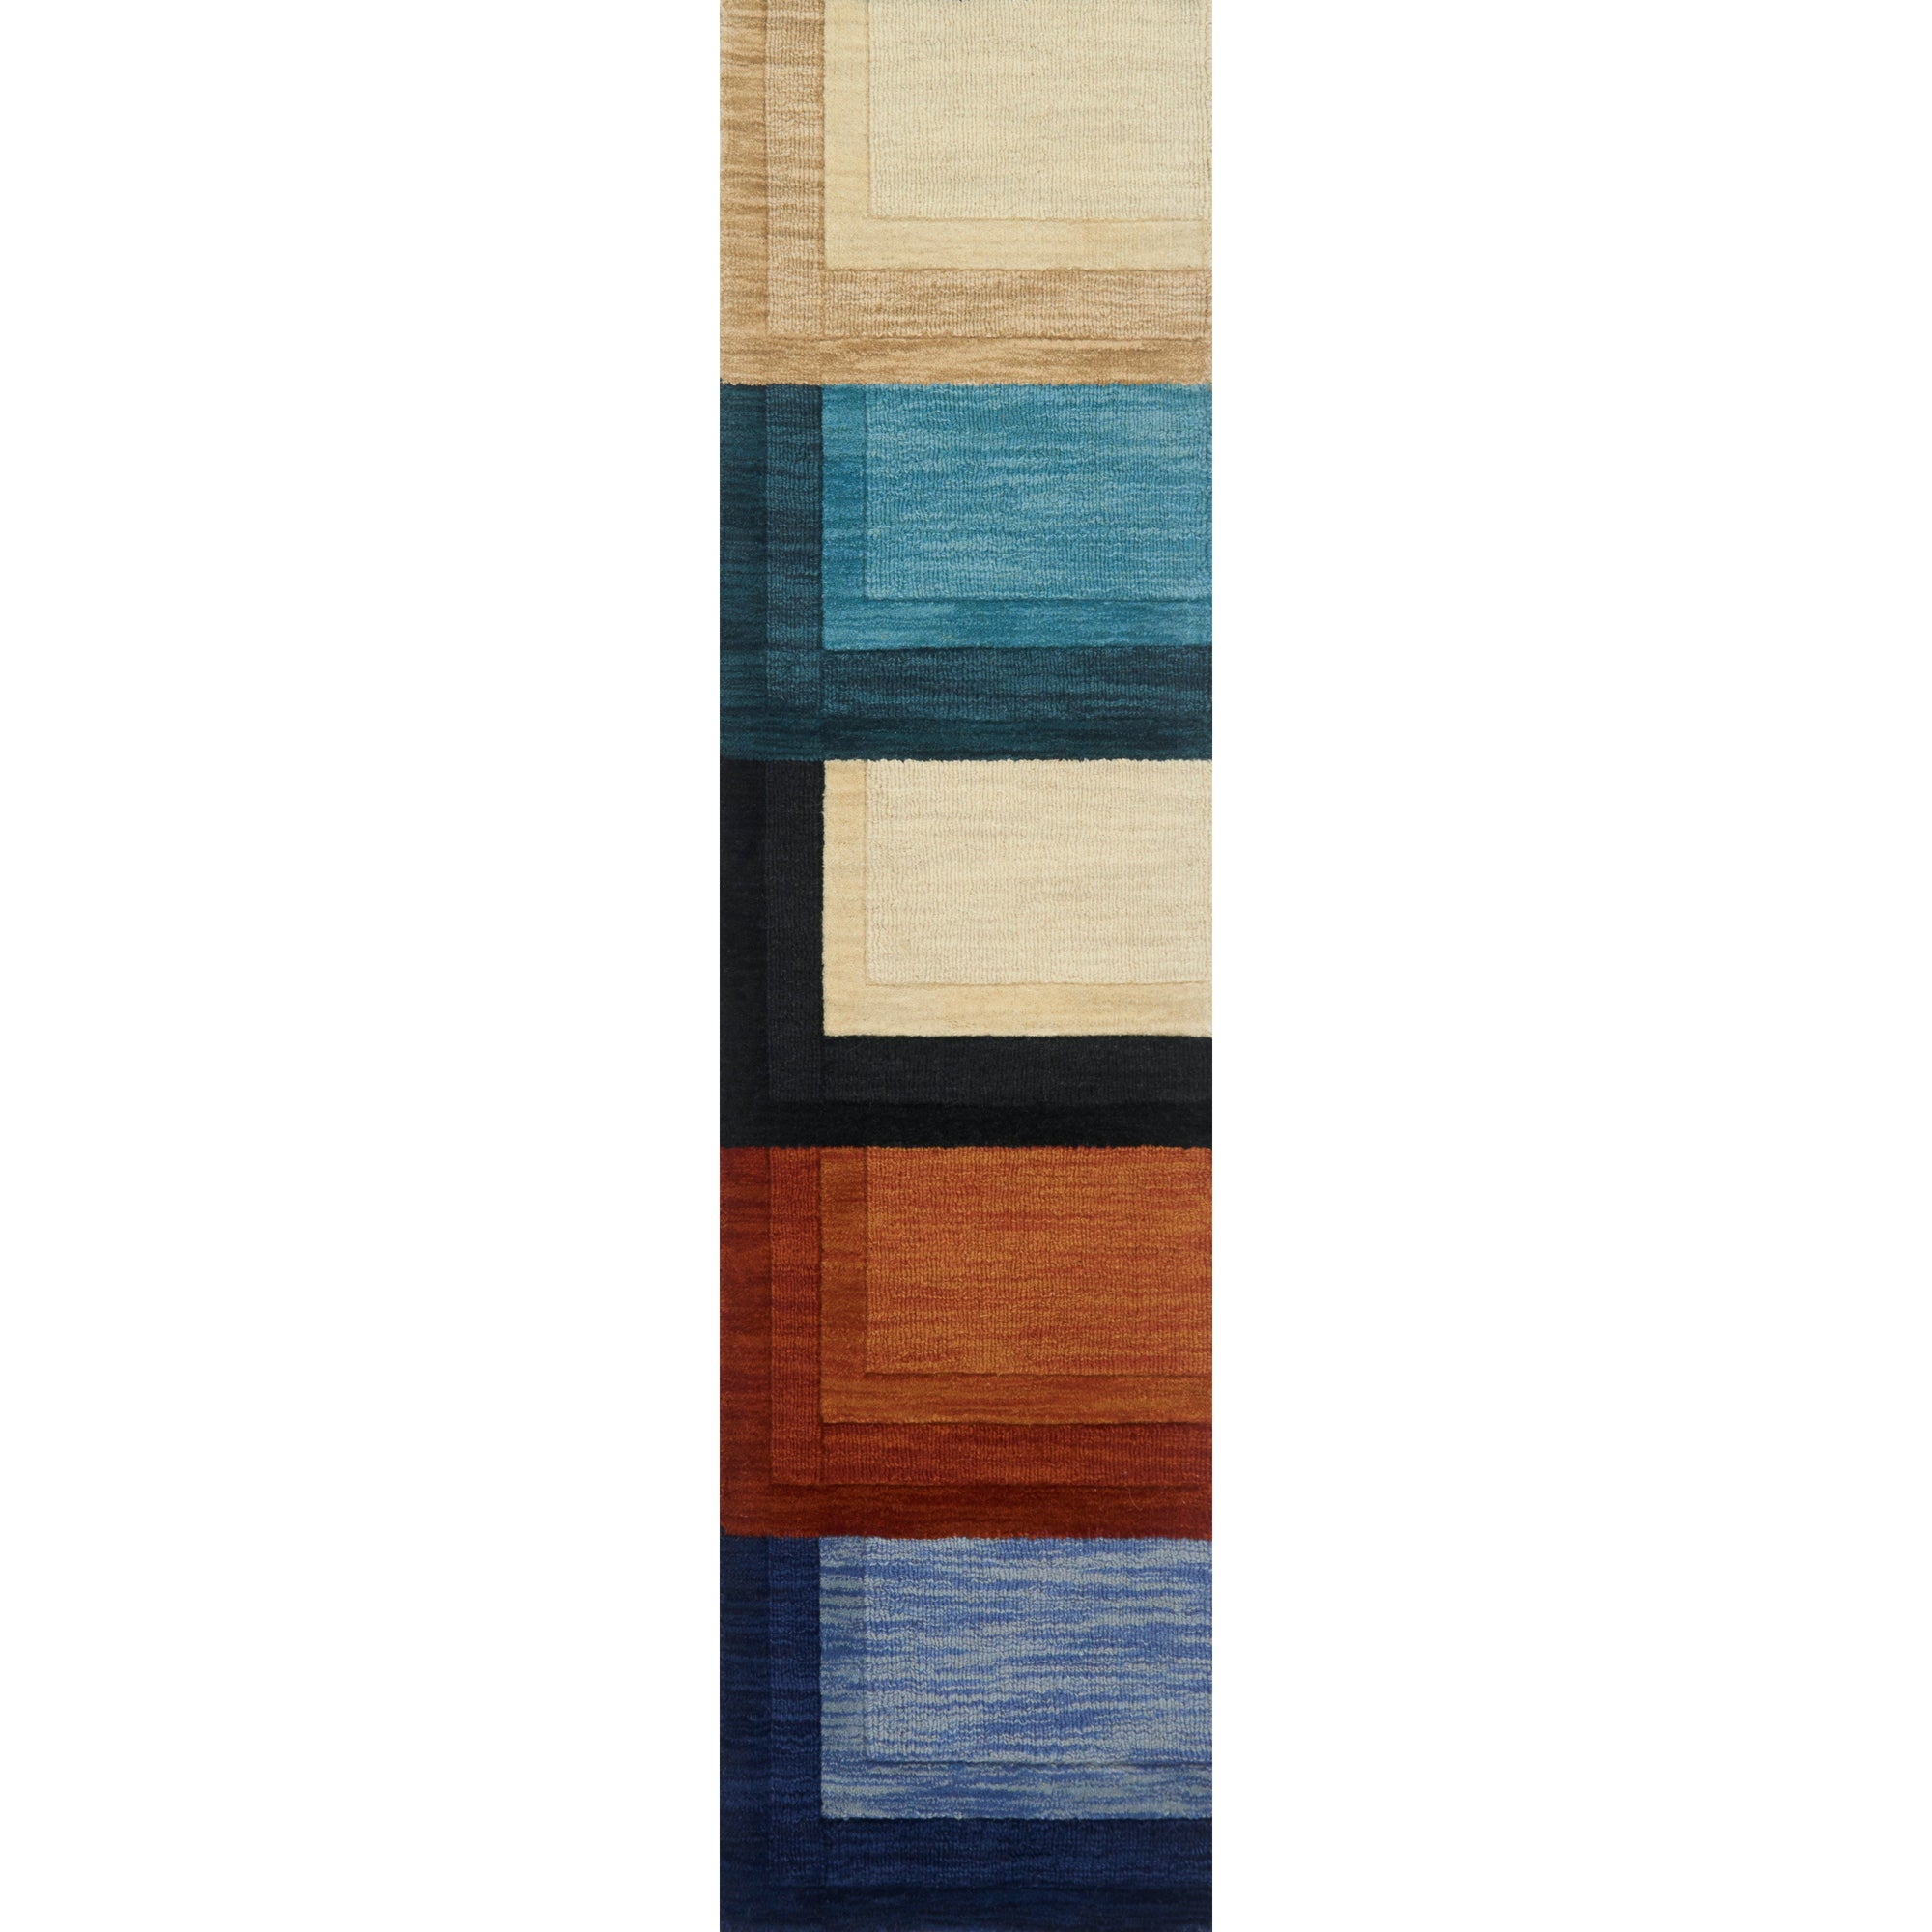 Rugs by Roo Loloi Hamilton Color Blanket 2 Area Rug in size 1' x 5'